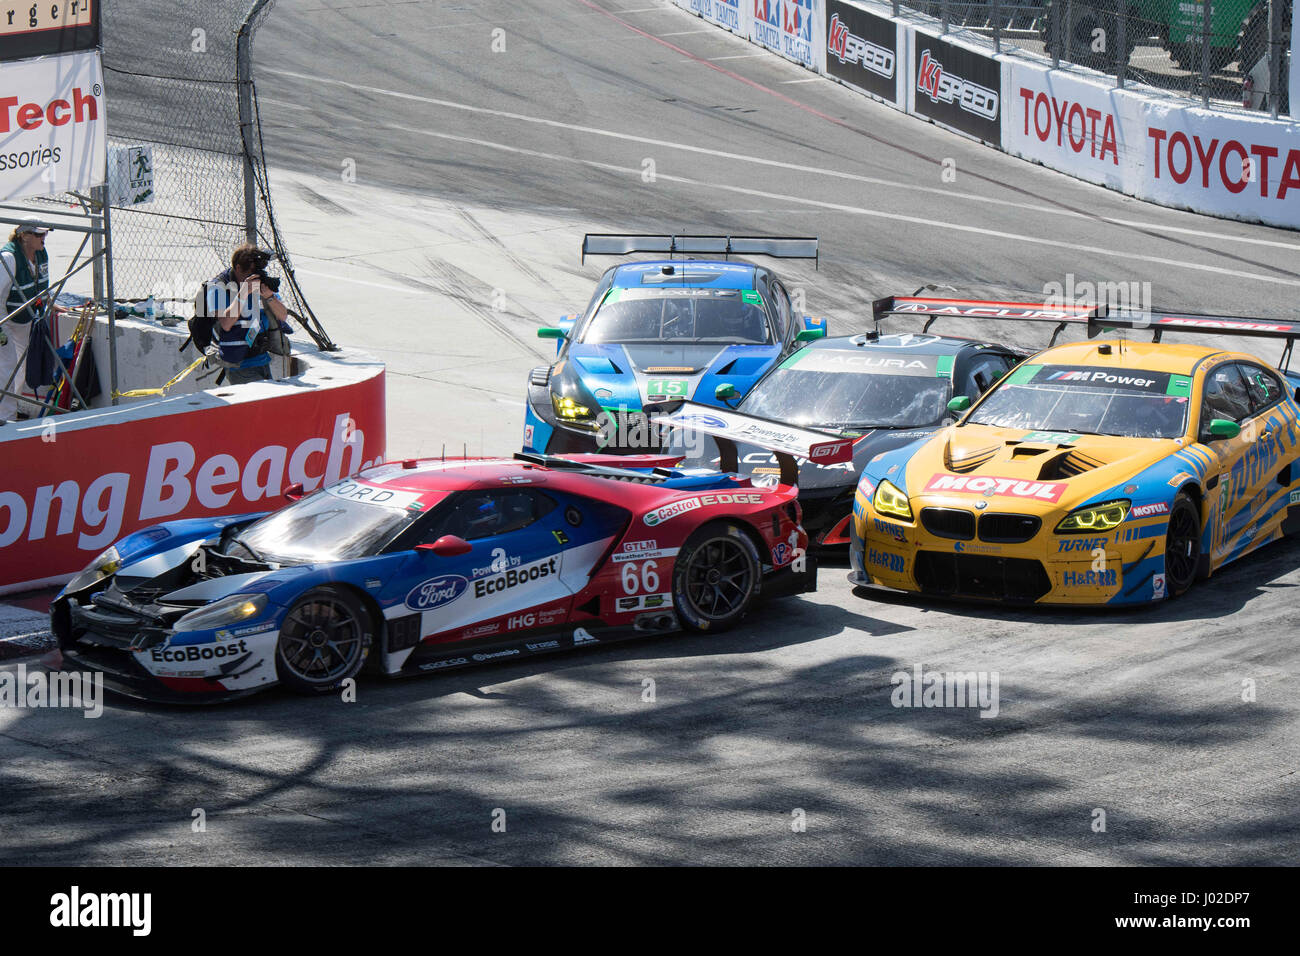 Long Beach, California, USA. 8th April, 2017. Track By Drivers For The Incident. 08th Apr, 2017. A multi-car incident in the hairpin turn on the final lap of the IMSA BUBBA Burger Sports Car Grand Prix at Long Beach had the entire racetrack blocked as race-leading Antonio Garcia in the No. 3 Corvette C7.R ahead of Tommy Milner and Richard Westbrook. Garcia attempted to pass outside but was blocked eventually finishing 5th with Milner taking the victory. 3GT Daytona driver Robert Alon was confronted on track by drivers for the incident. Long Beach California. Steven Erler/CSM/Alamy Live News Stock Photo